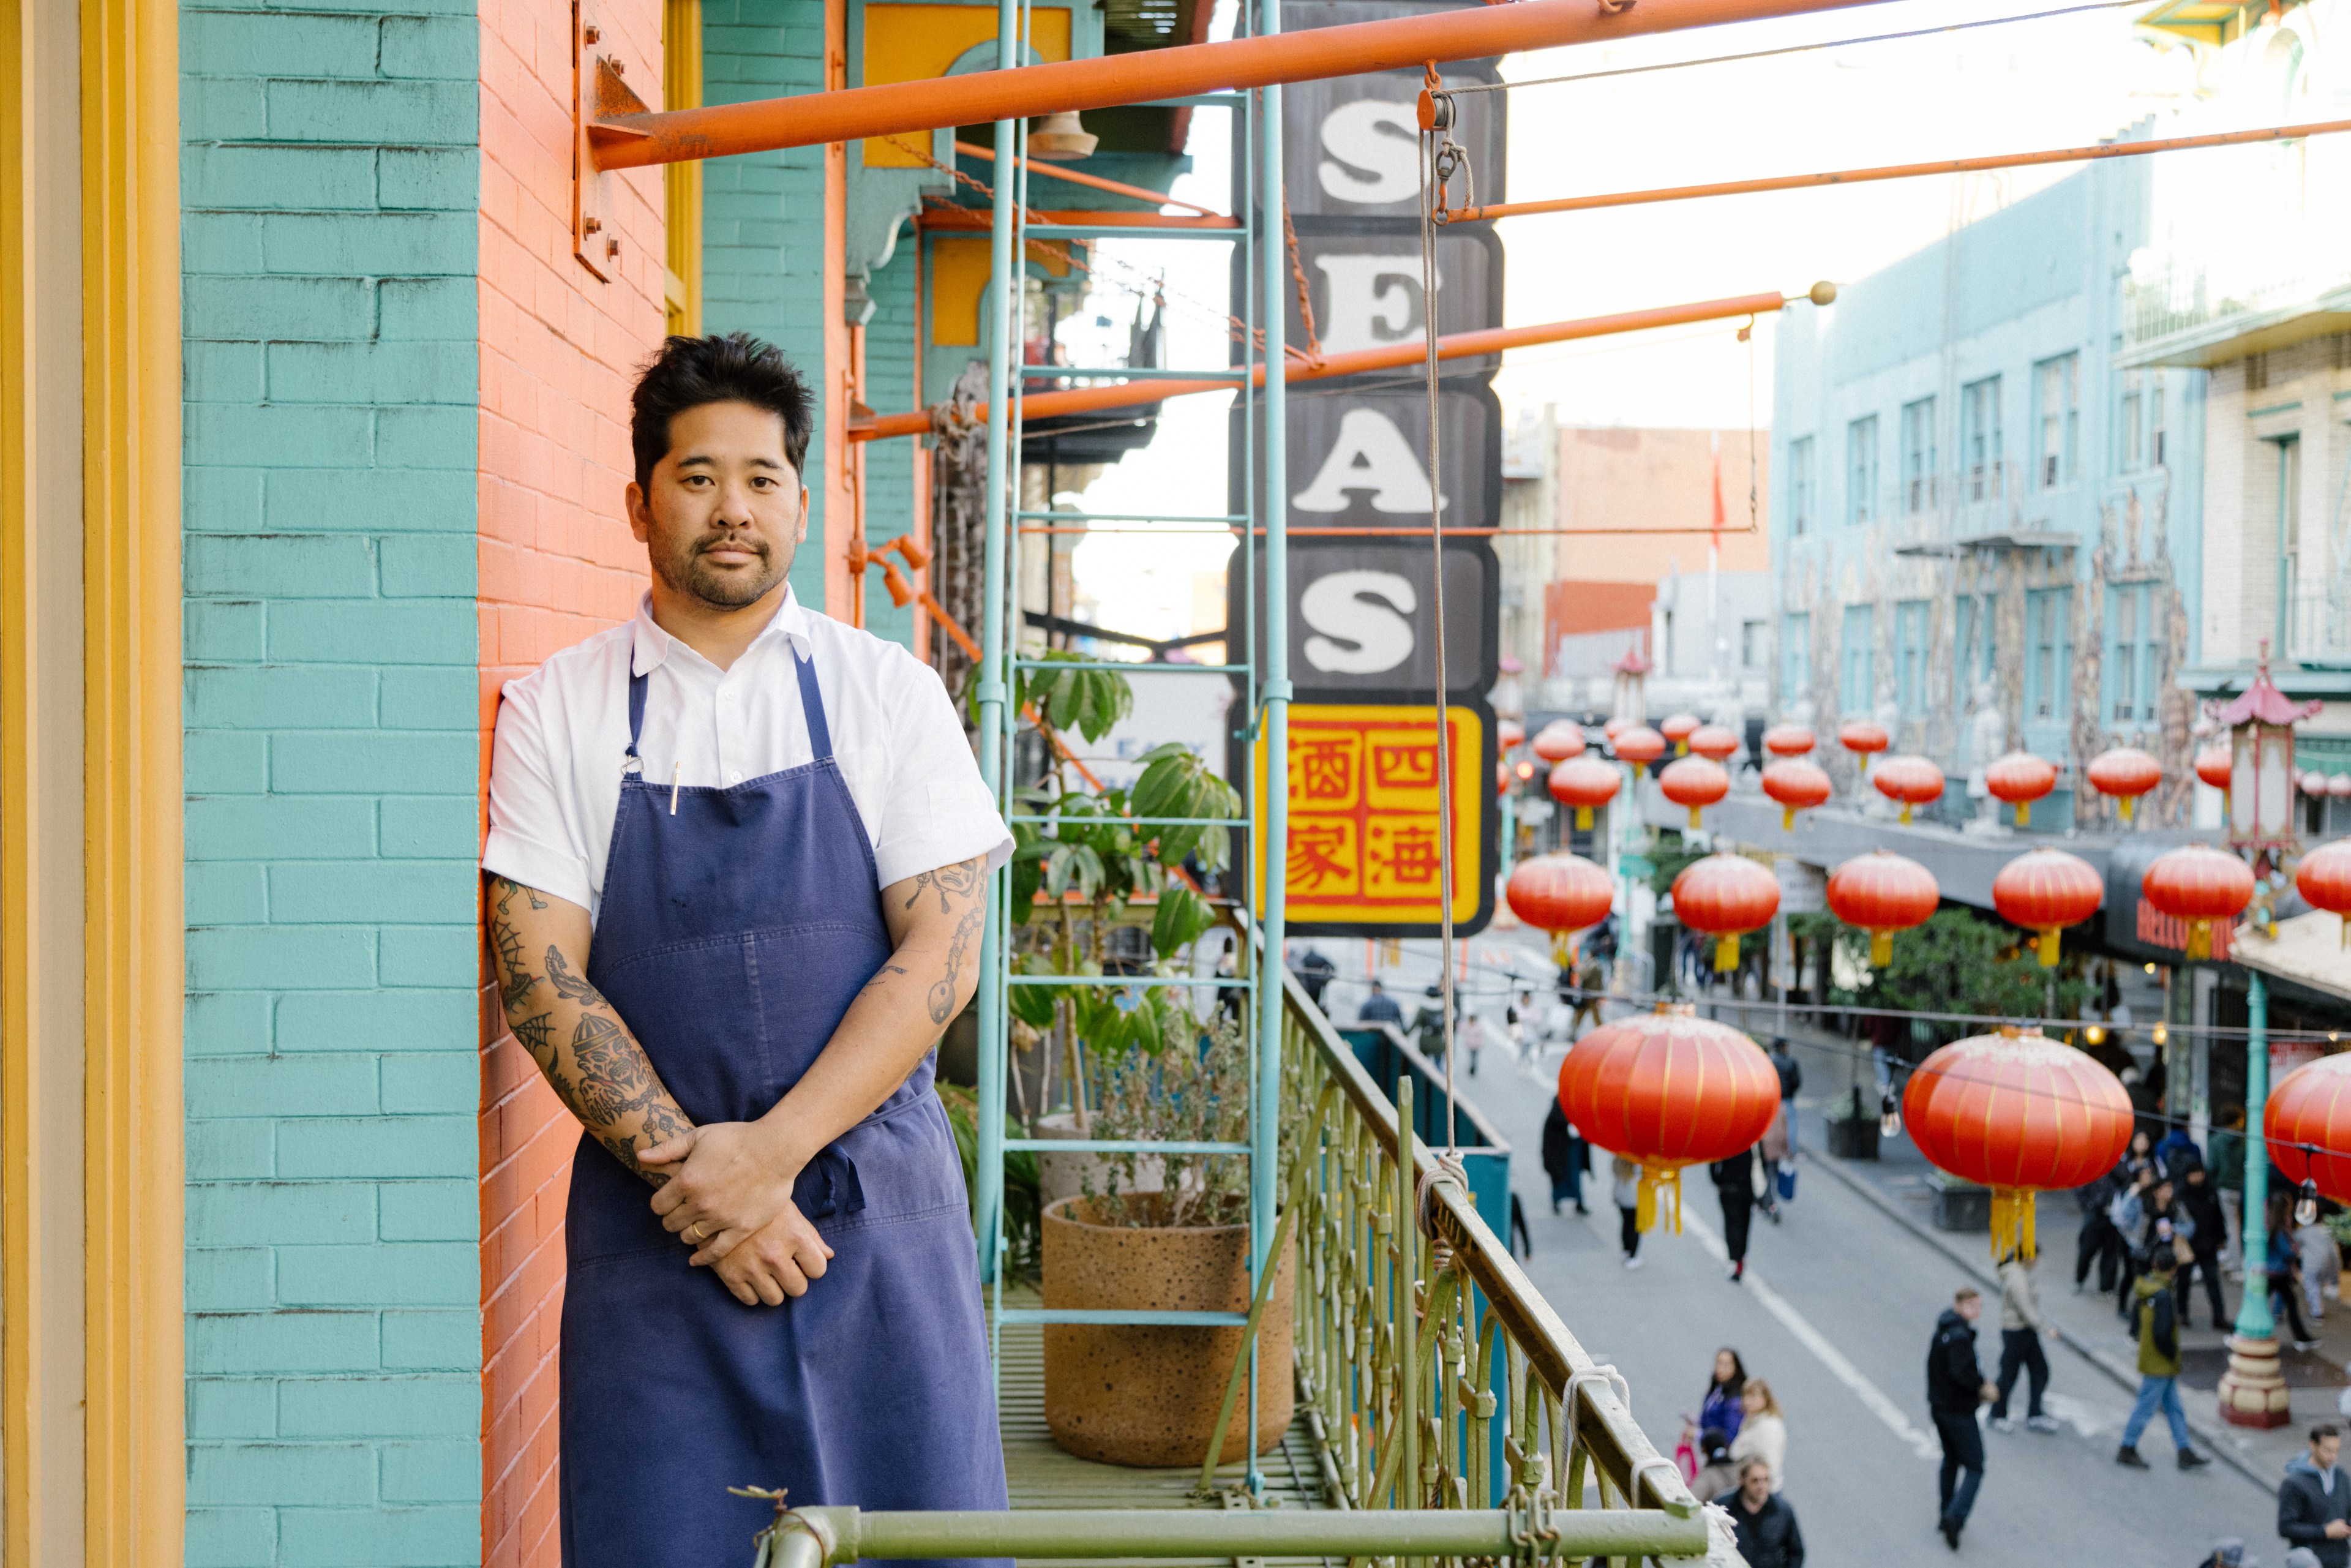 Brandon Jew, executive chef and owner of Mister Jiu's, stands on the balcony of the restaurant in San Francisco